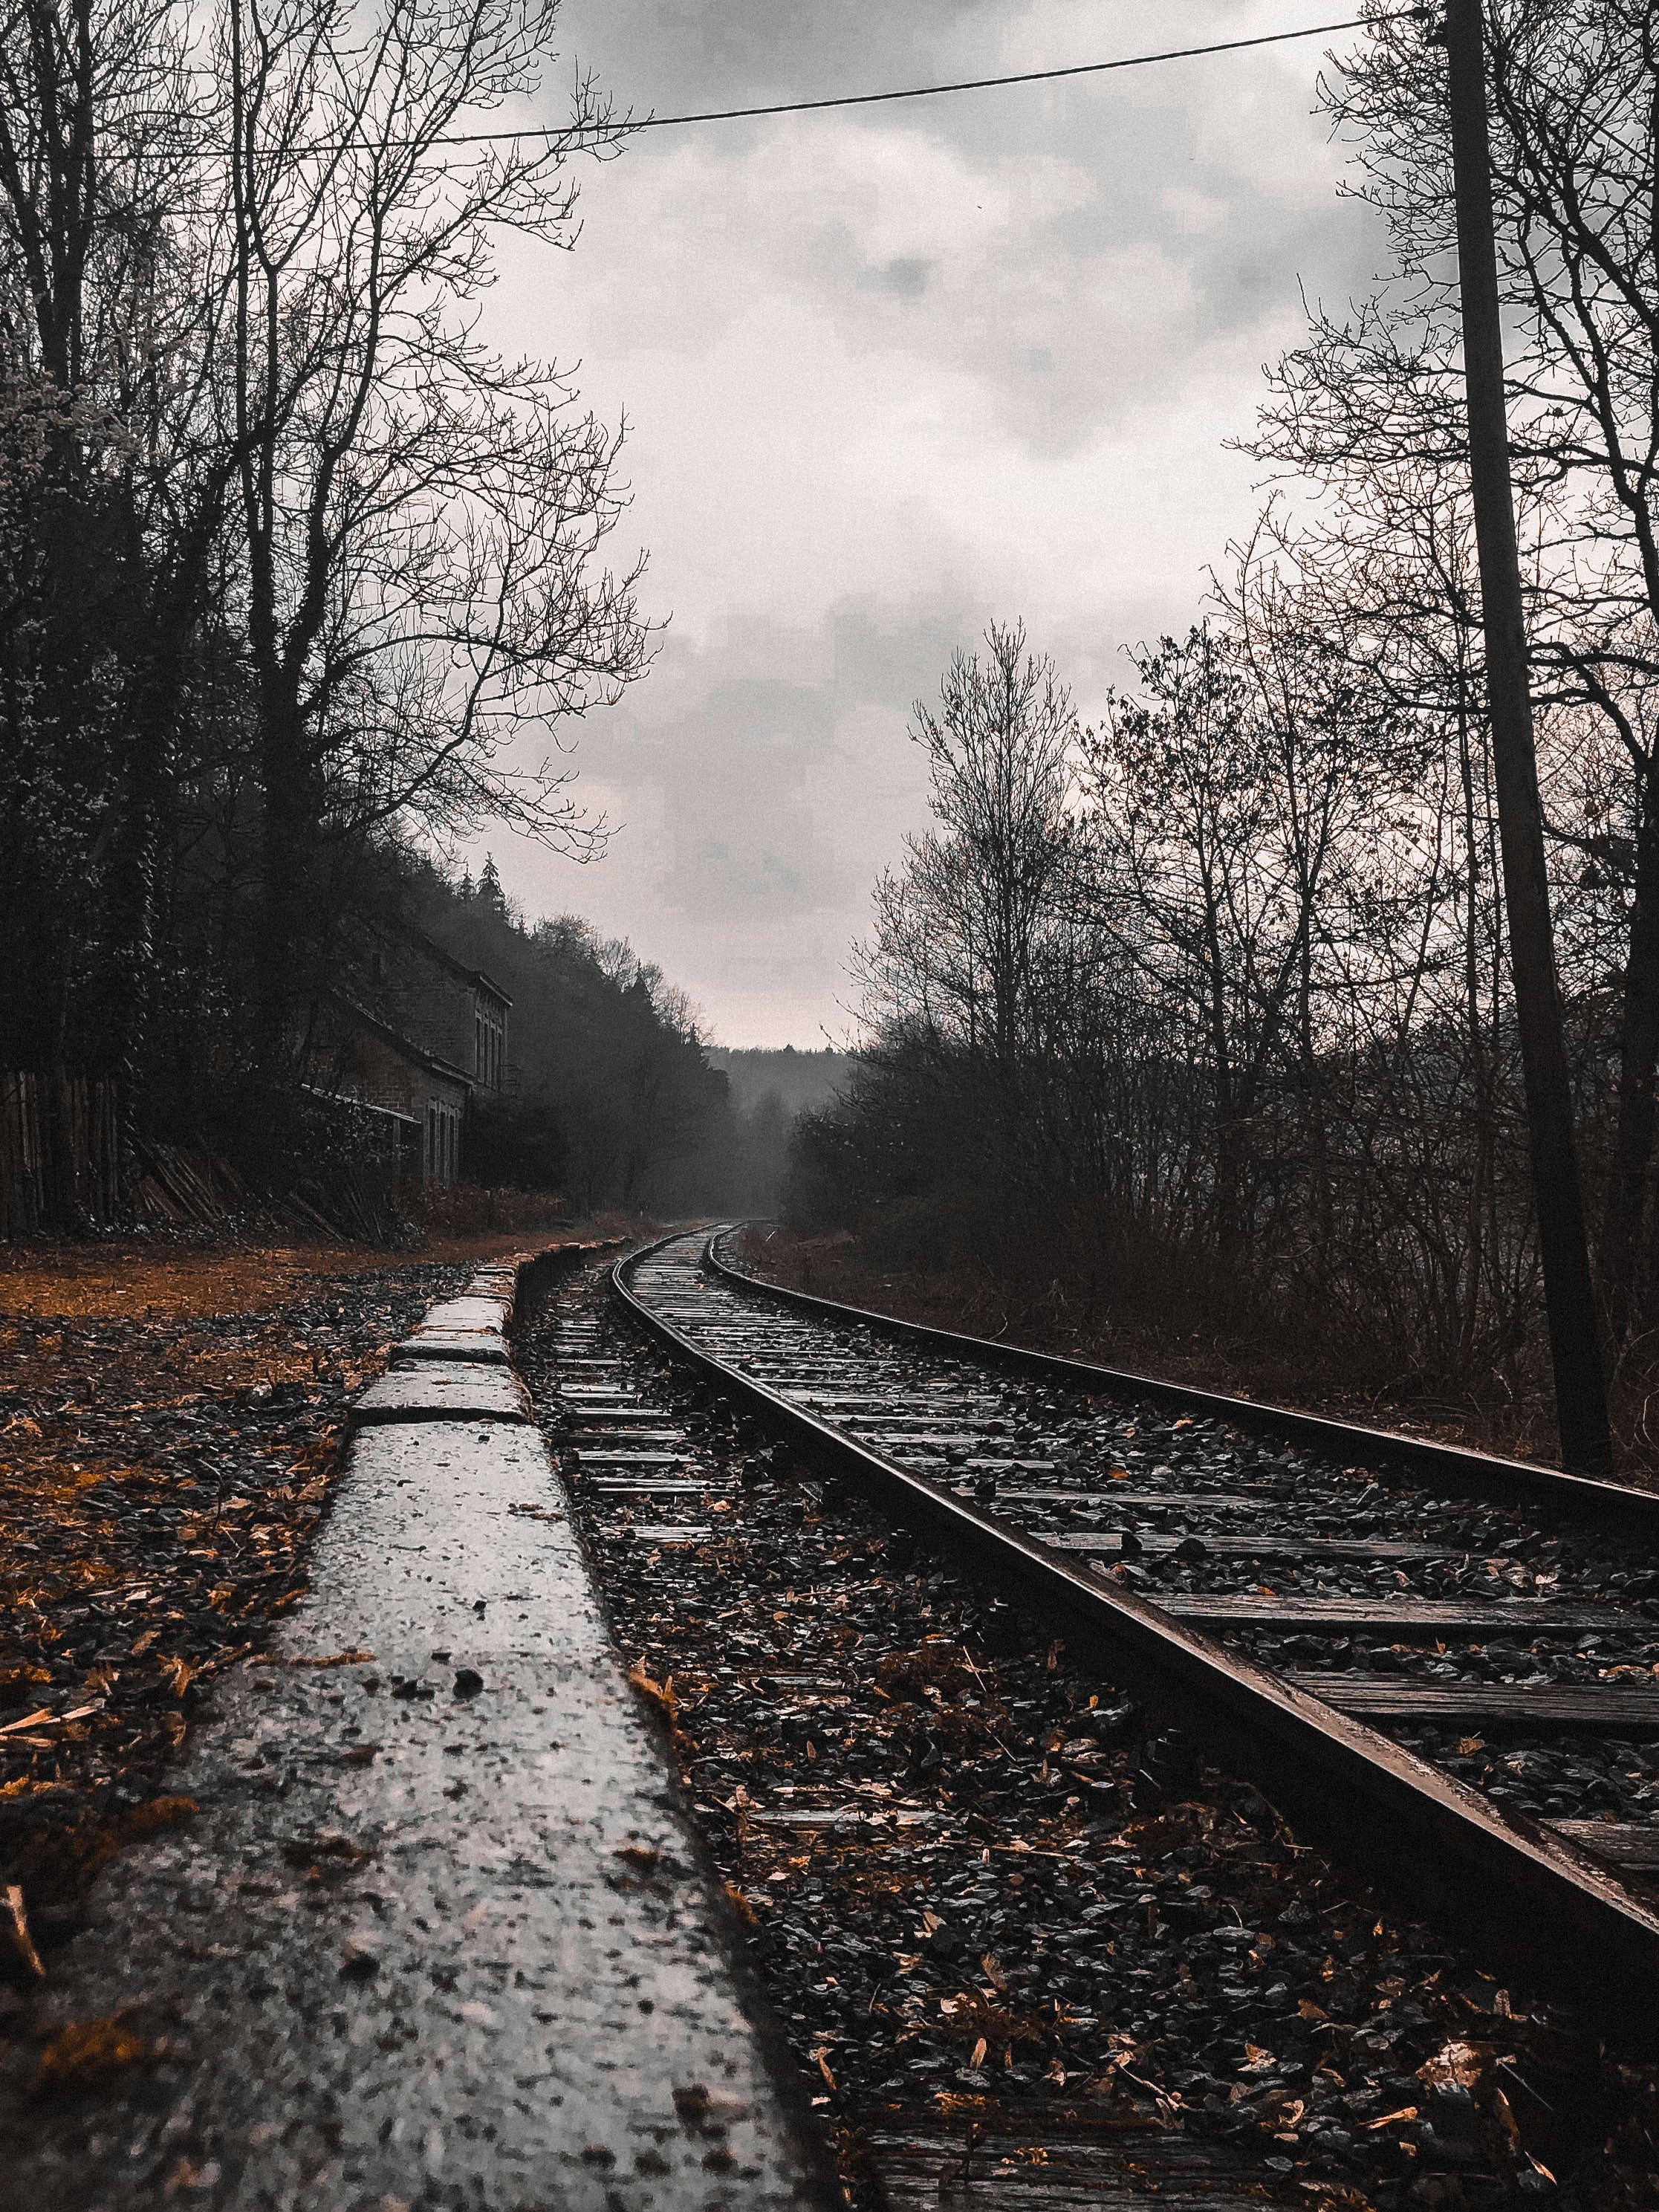 mainly cloudy, rails, forest, nature, railway, overcast Full HD